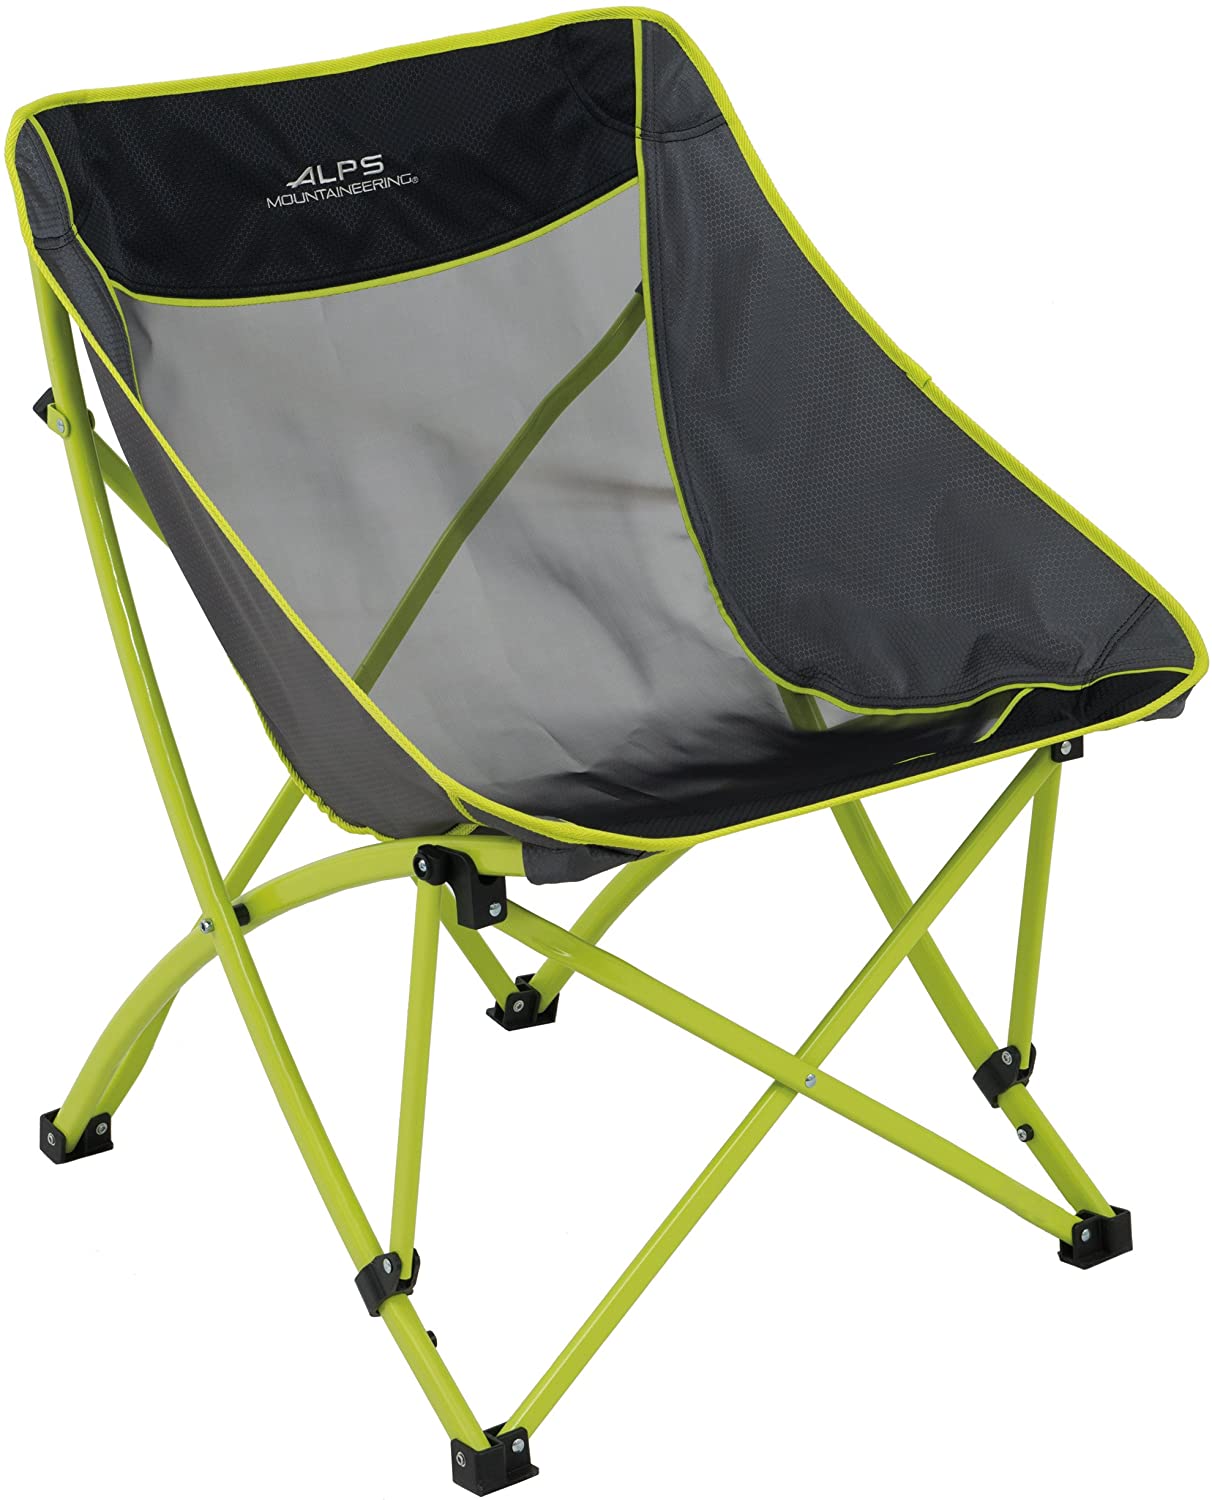 ALPS Mountaineering Camber Chair, Citrus/Charcoal - AL8012135